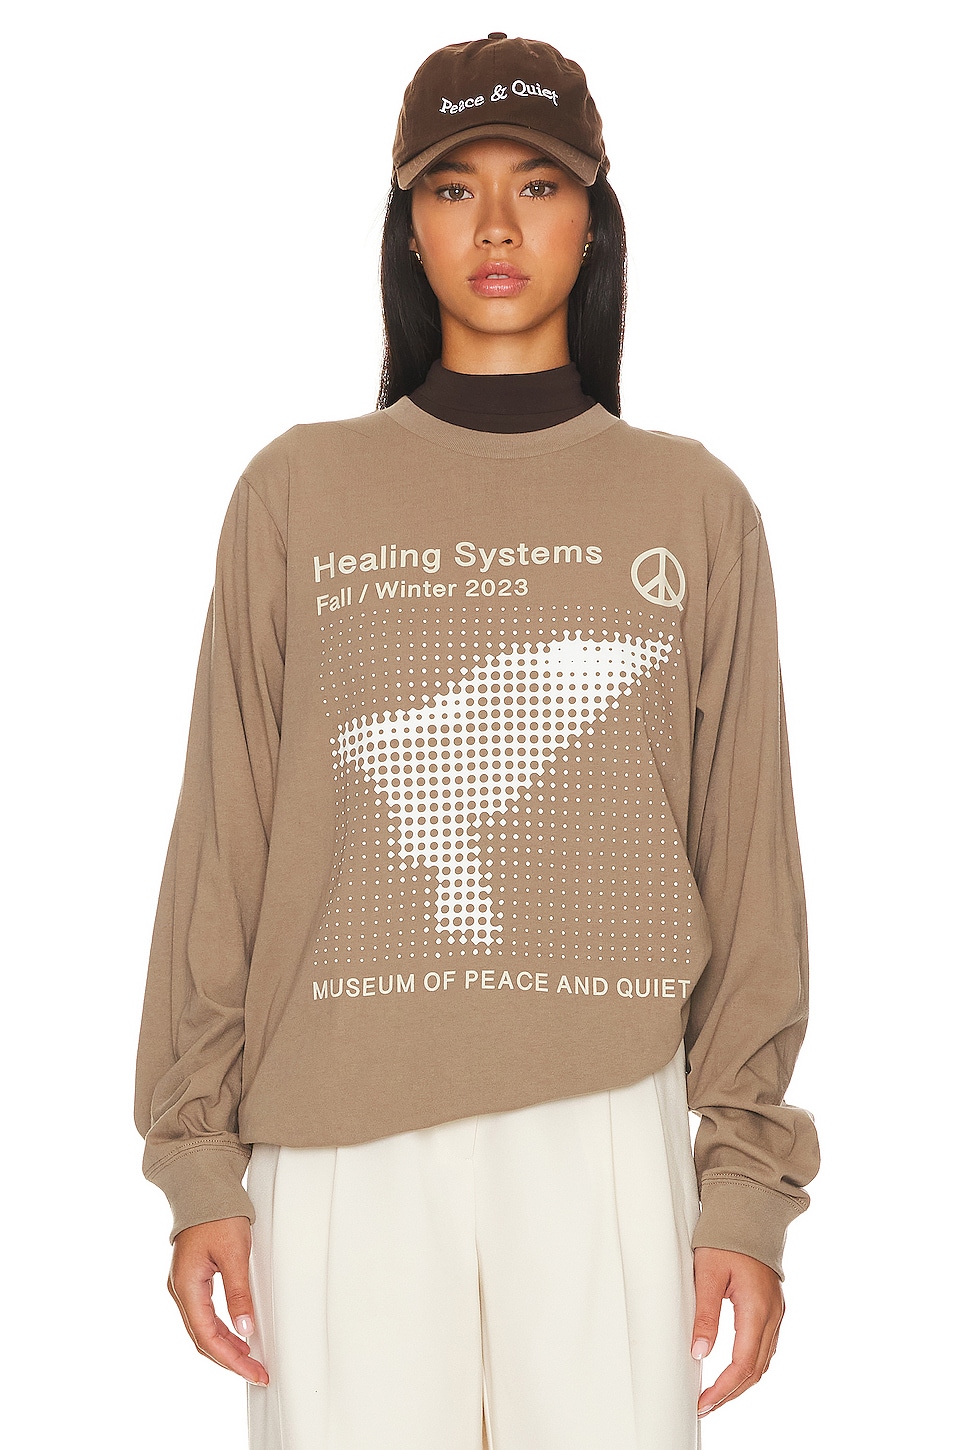 Футболка Museum of Peace and Quiet Healing Systems Long Sleeve T-shirt, цвет Clay different kinds of flower clay based tutorial book handmade diy clay textbook manual production course of clay